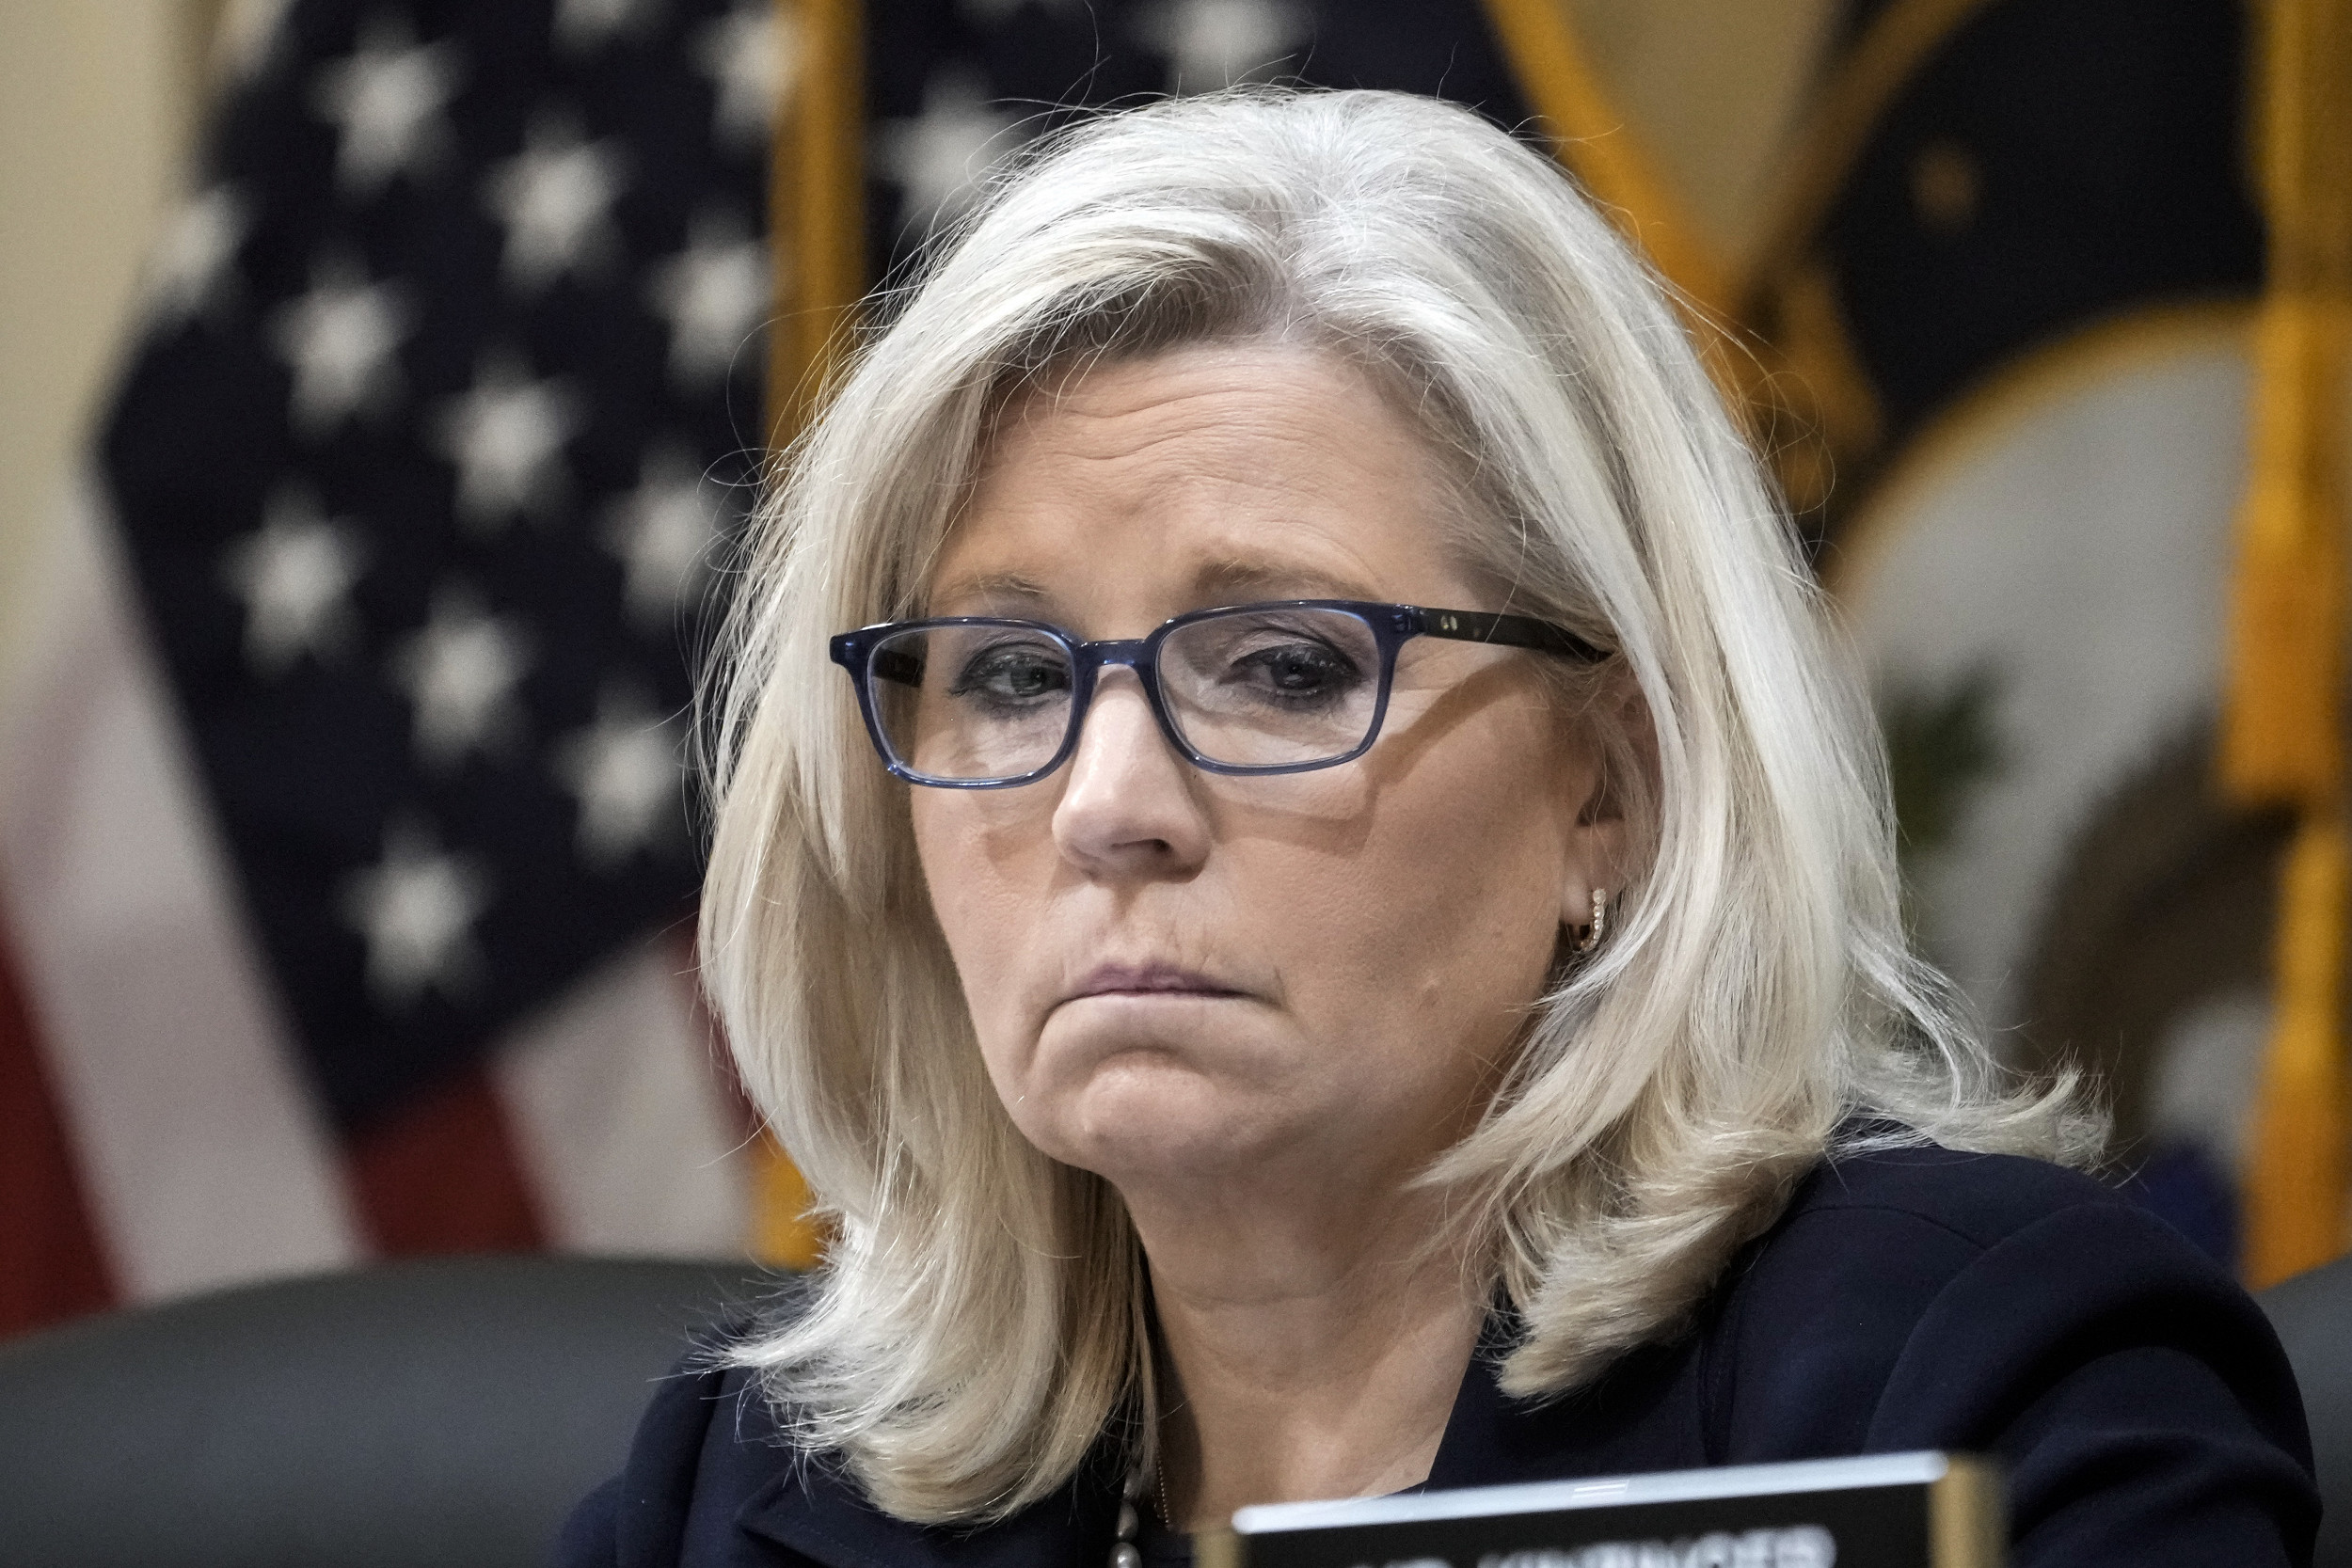 Liz Cheney Would Rather Work With Democrats Than Marjorie Taylor Greene